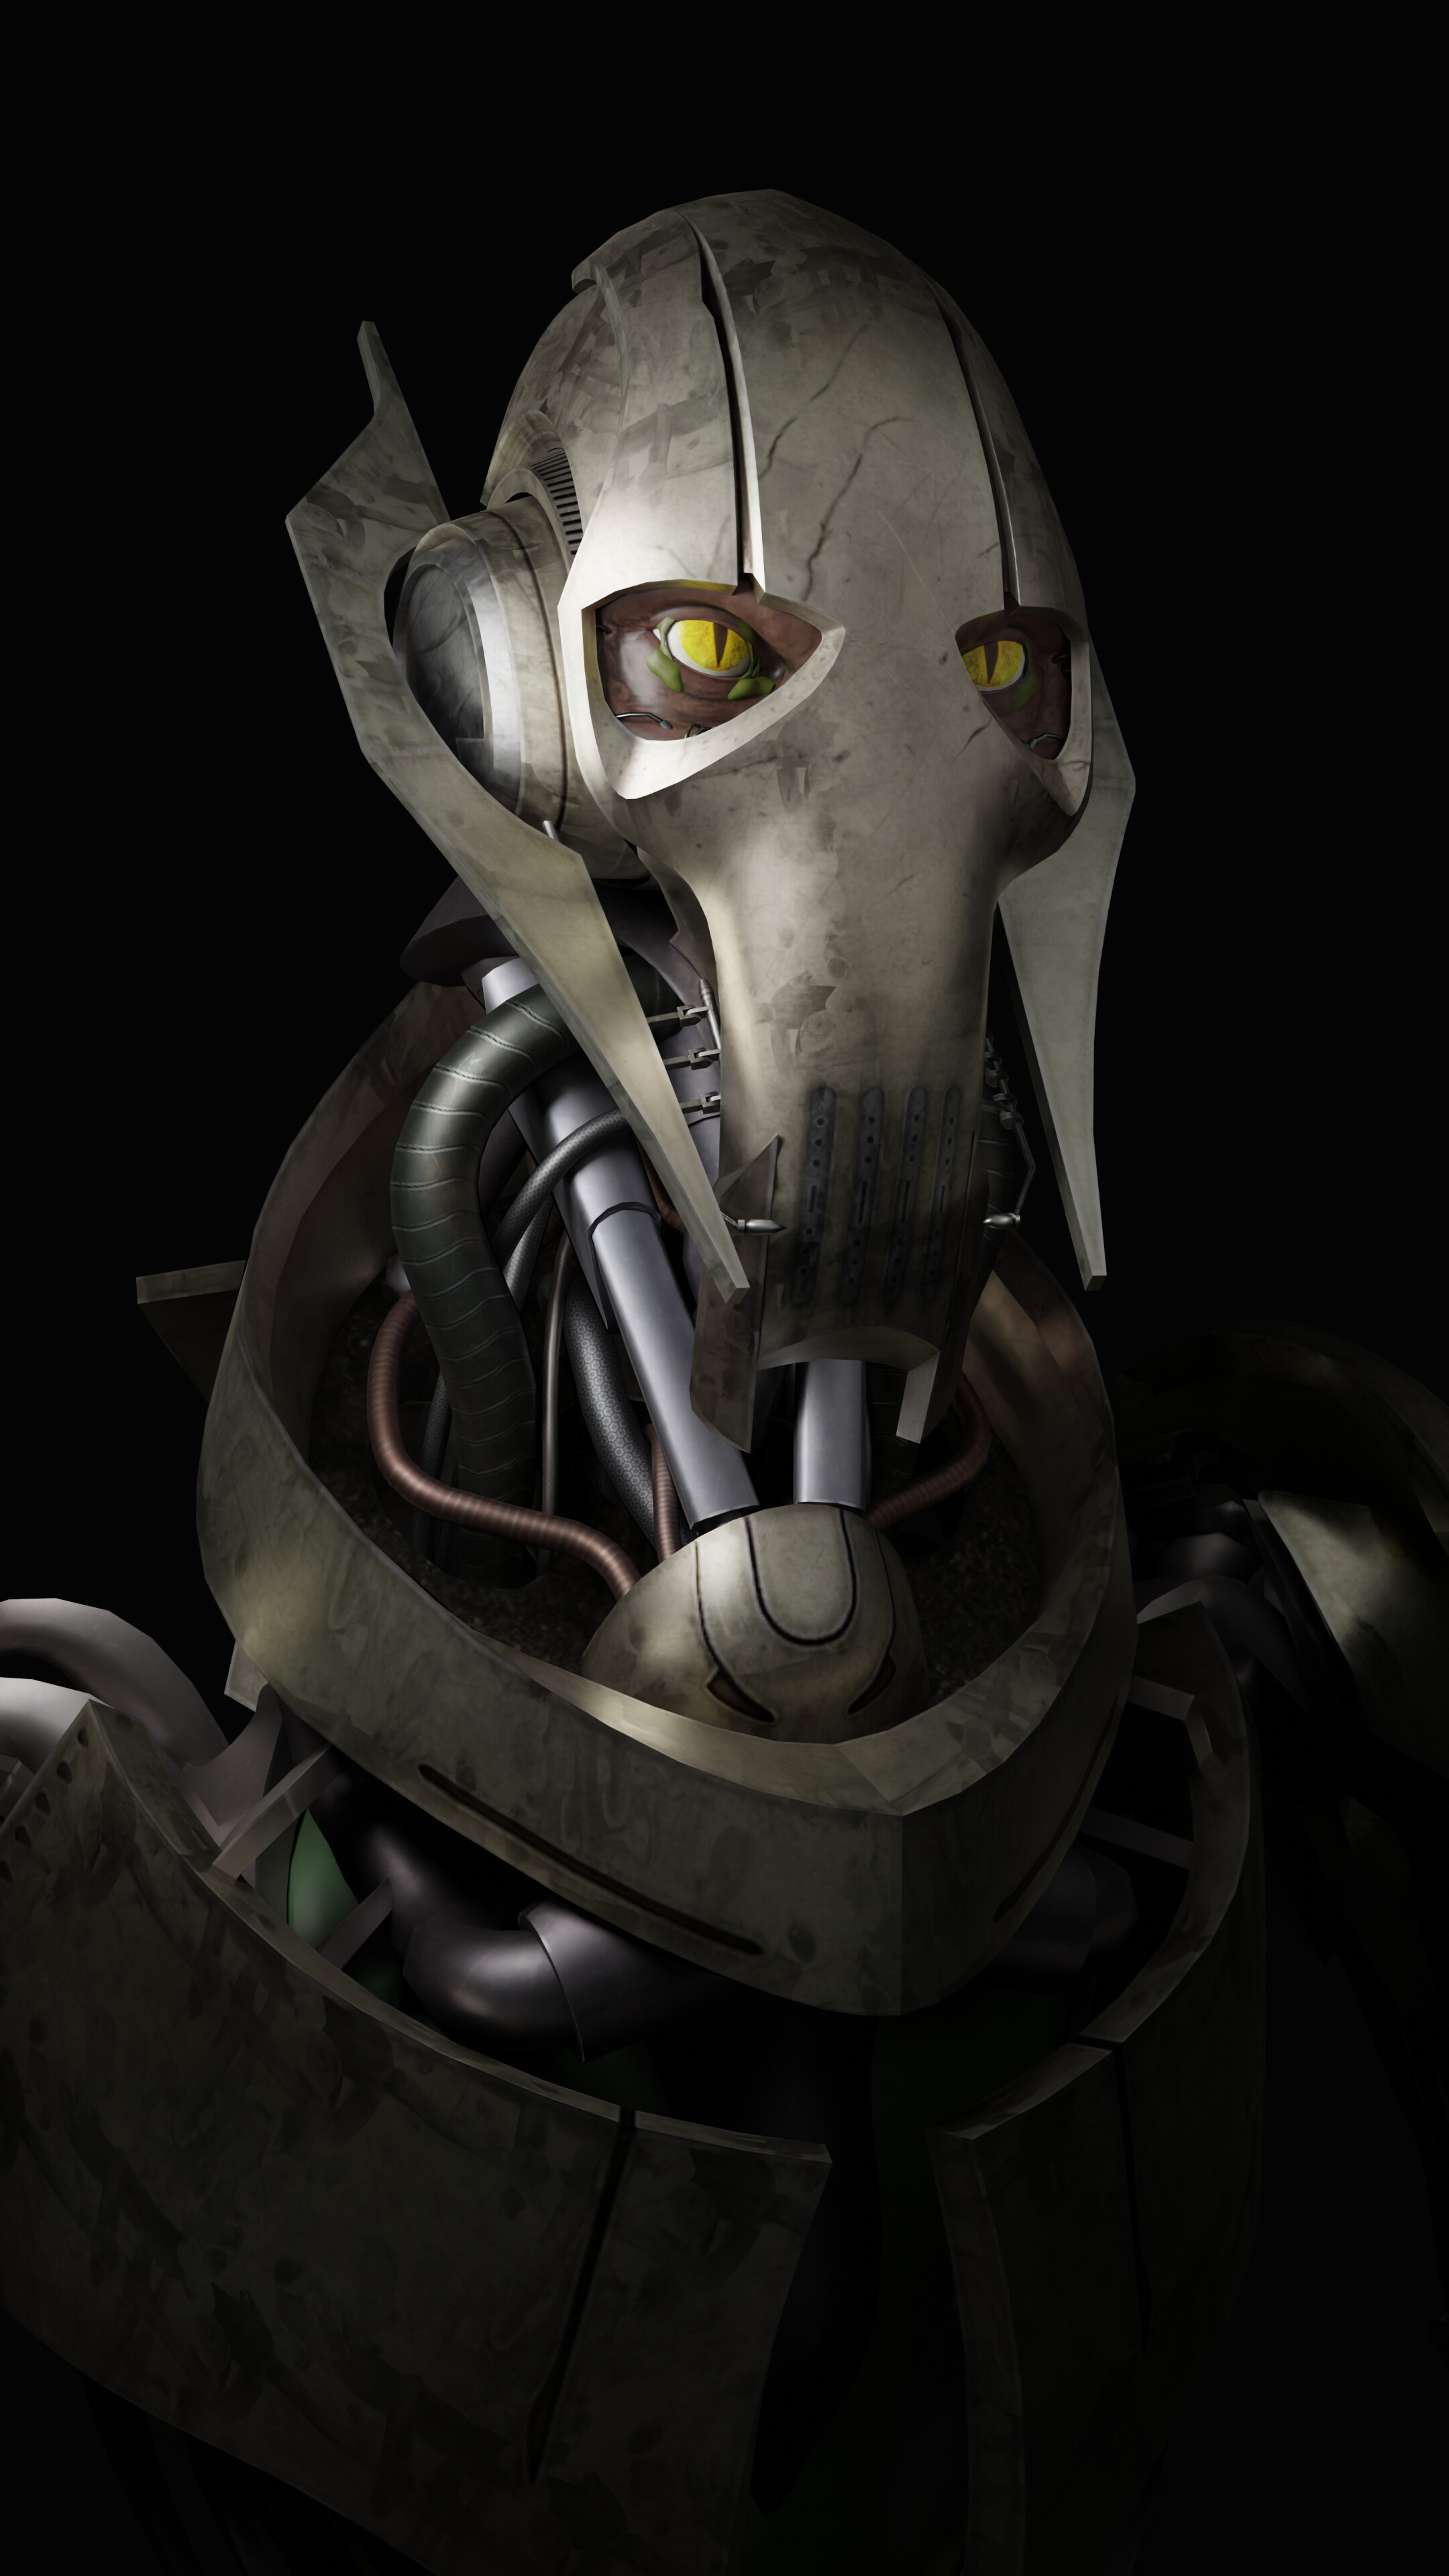 General Grievous: The character introduced in the 2003 animated series Star Wars: Clone Wars, A brilliant military strategist. 2160x3840 4K Background.